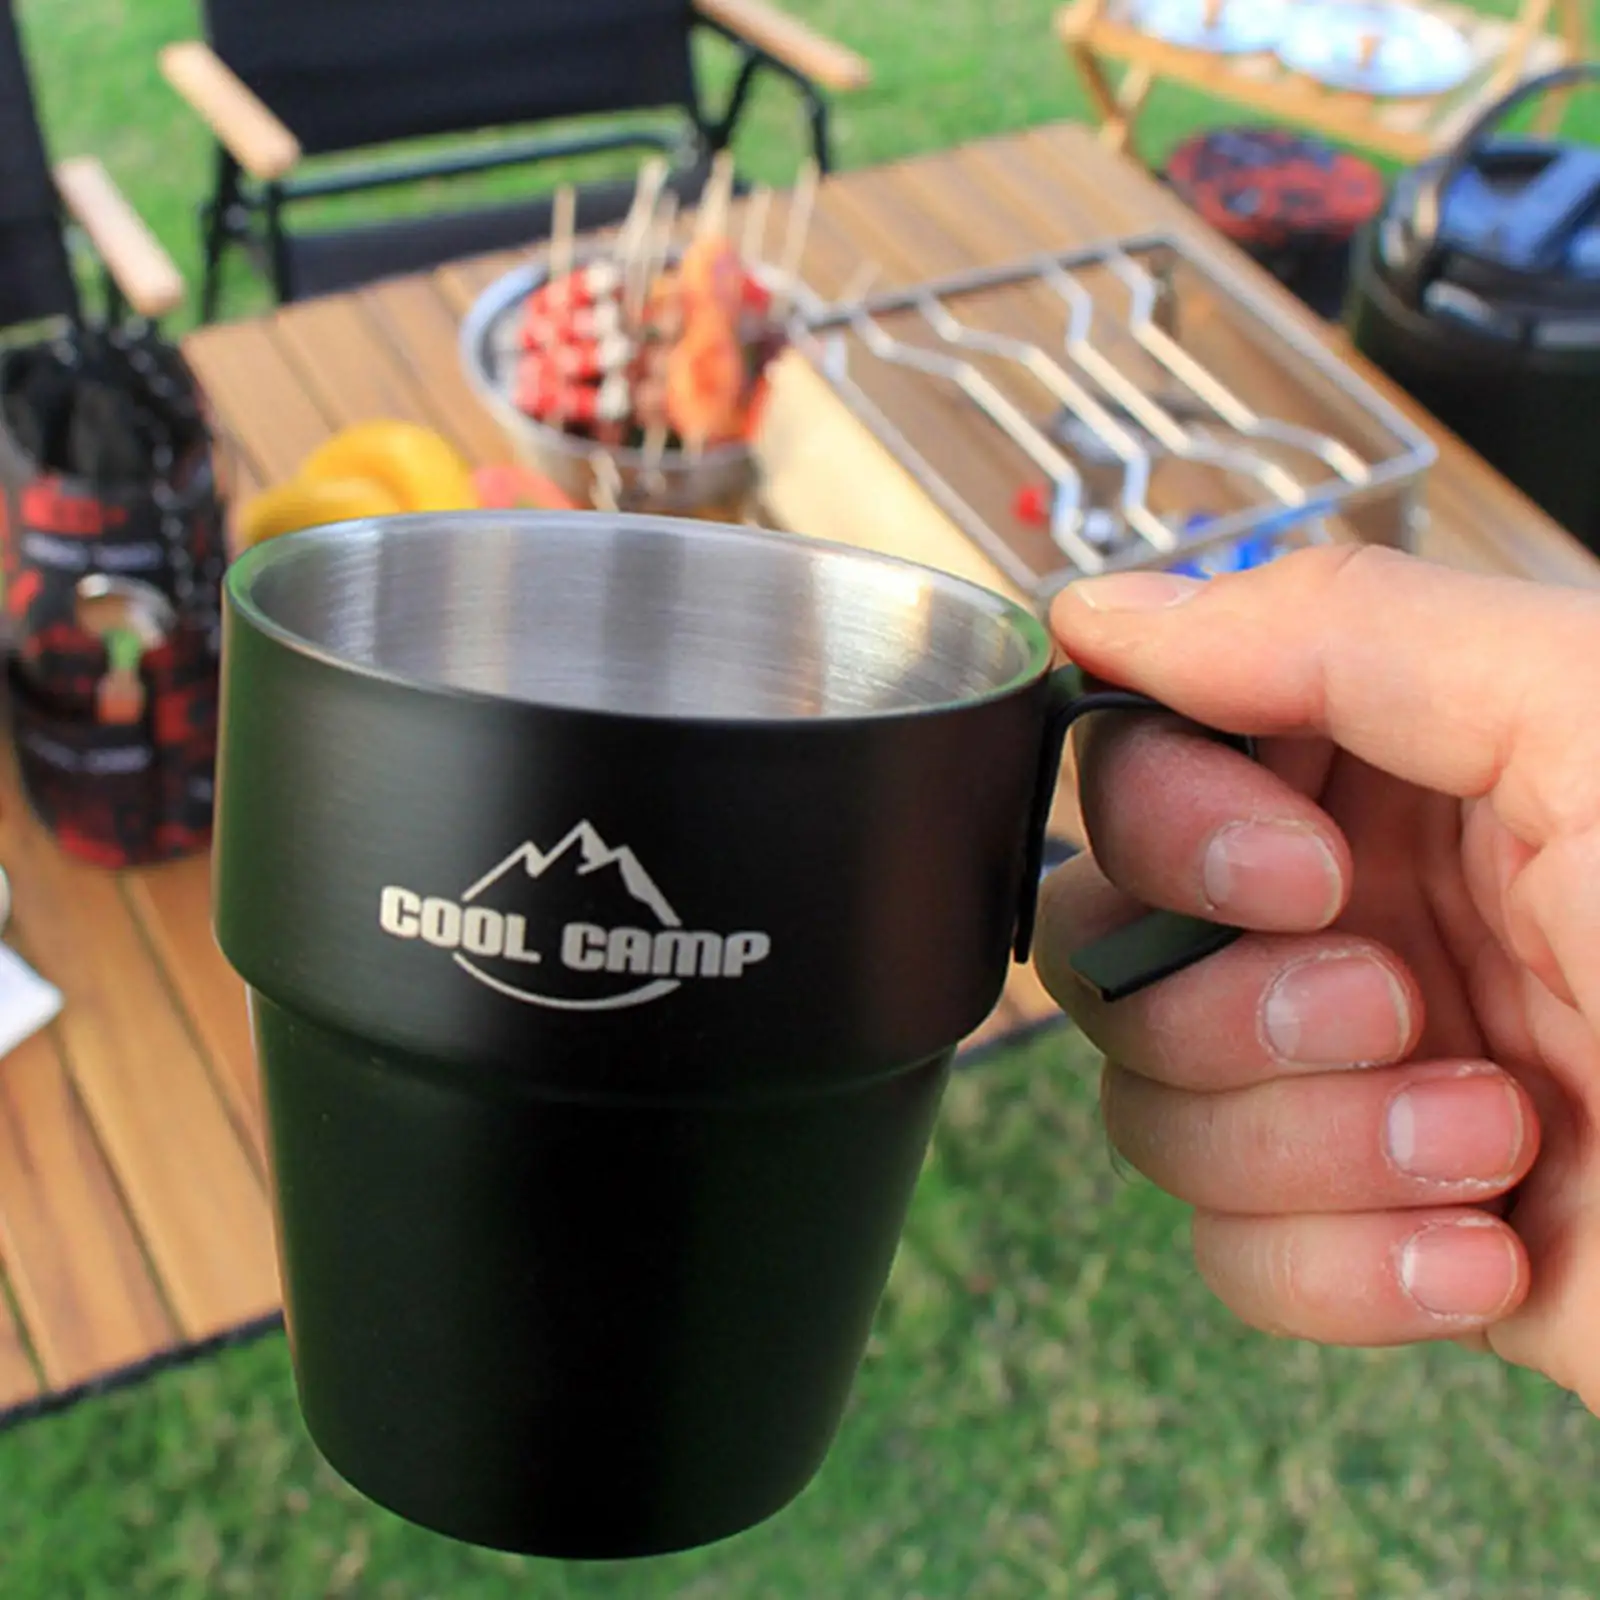 Double Camping Mugs Heating Portable with Reusable Light Preservative for Baking